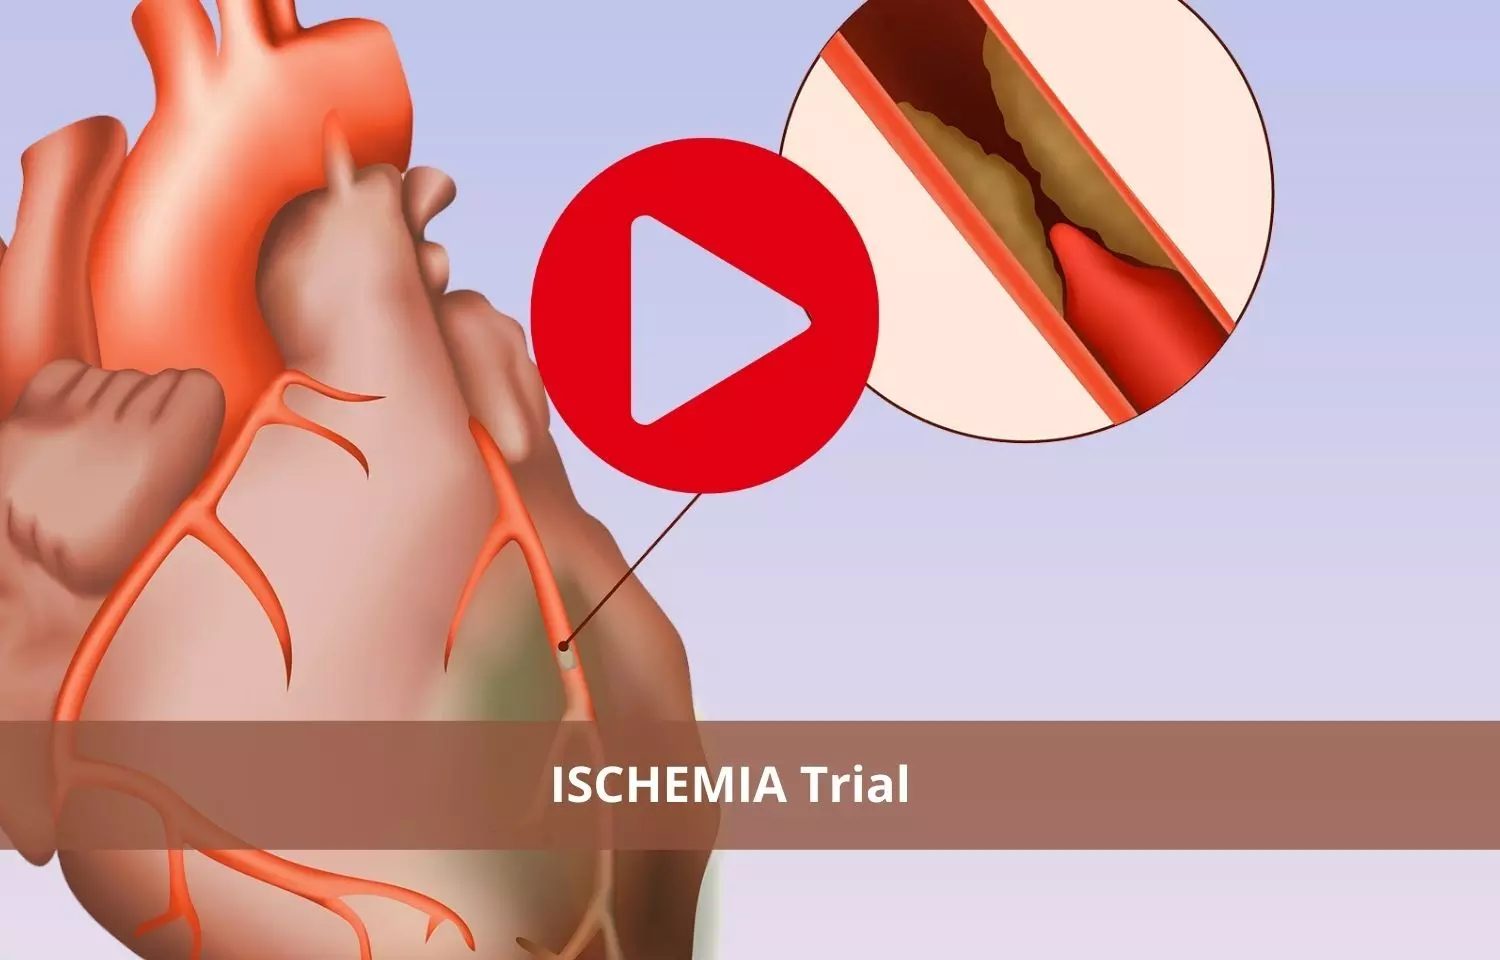 ISCHEMIA Trial: Routine invasive therapy does not reduce MACE